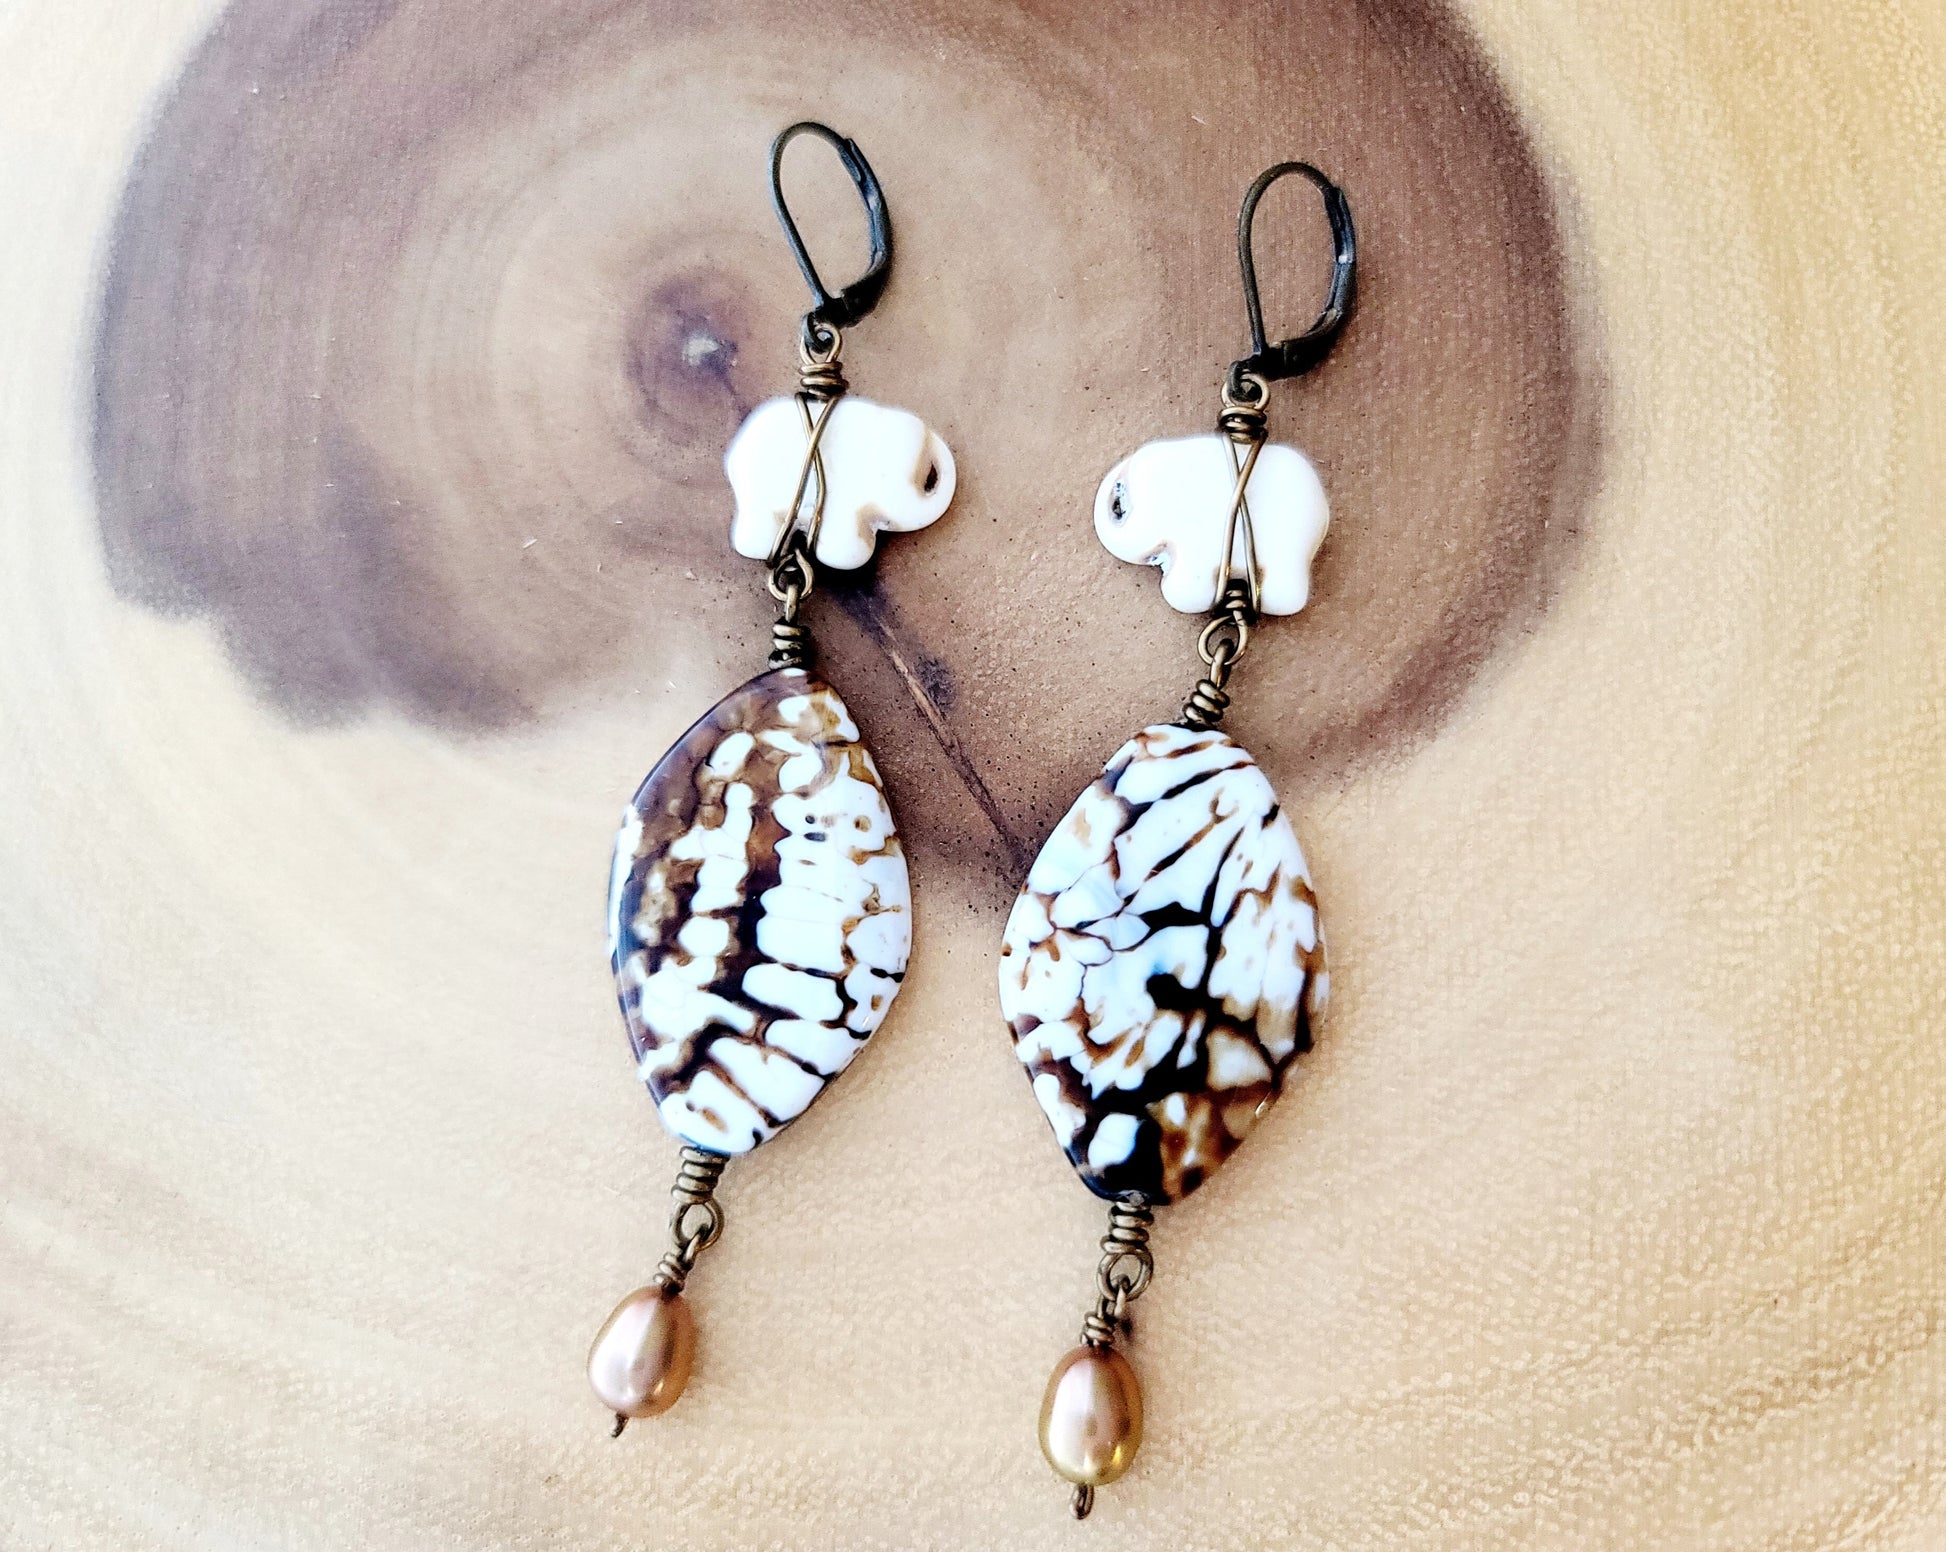 Wild Earth Elephant Earrings, Long Elephant Earrings made with Glazed Agate, Howlite, Gold Freshwater Cultured Pearl, displayed on wood